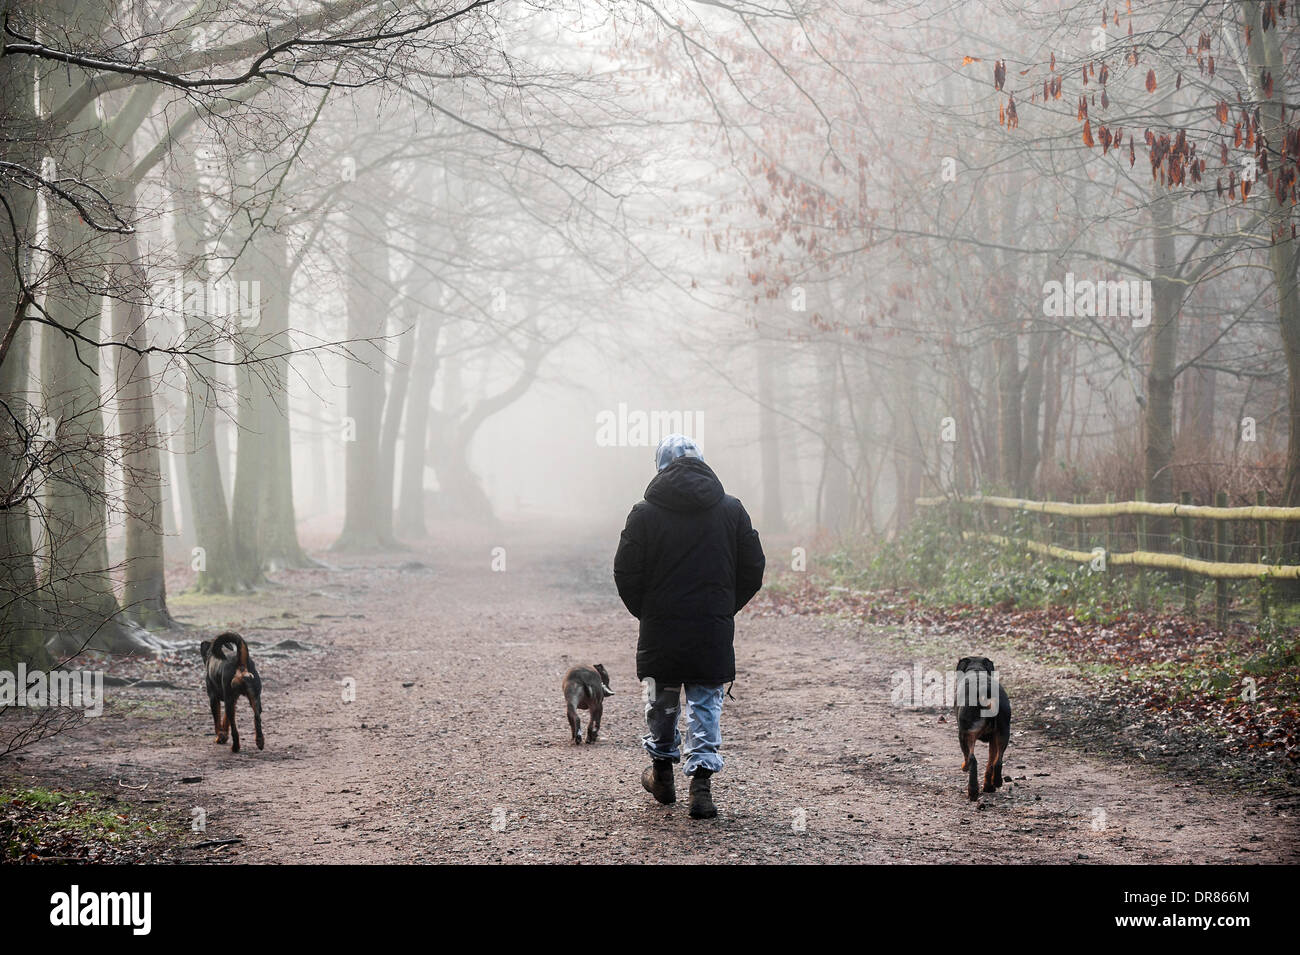 Brentwood, Essex, UK. January 21st 2014  A dog walker and his three pets brave the thick fog shrouding the Essex countryside.  Photographer: Gordon Scammell/Alamy Live News Stock Photo